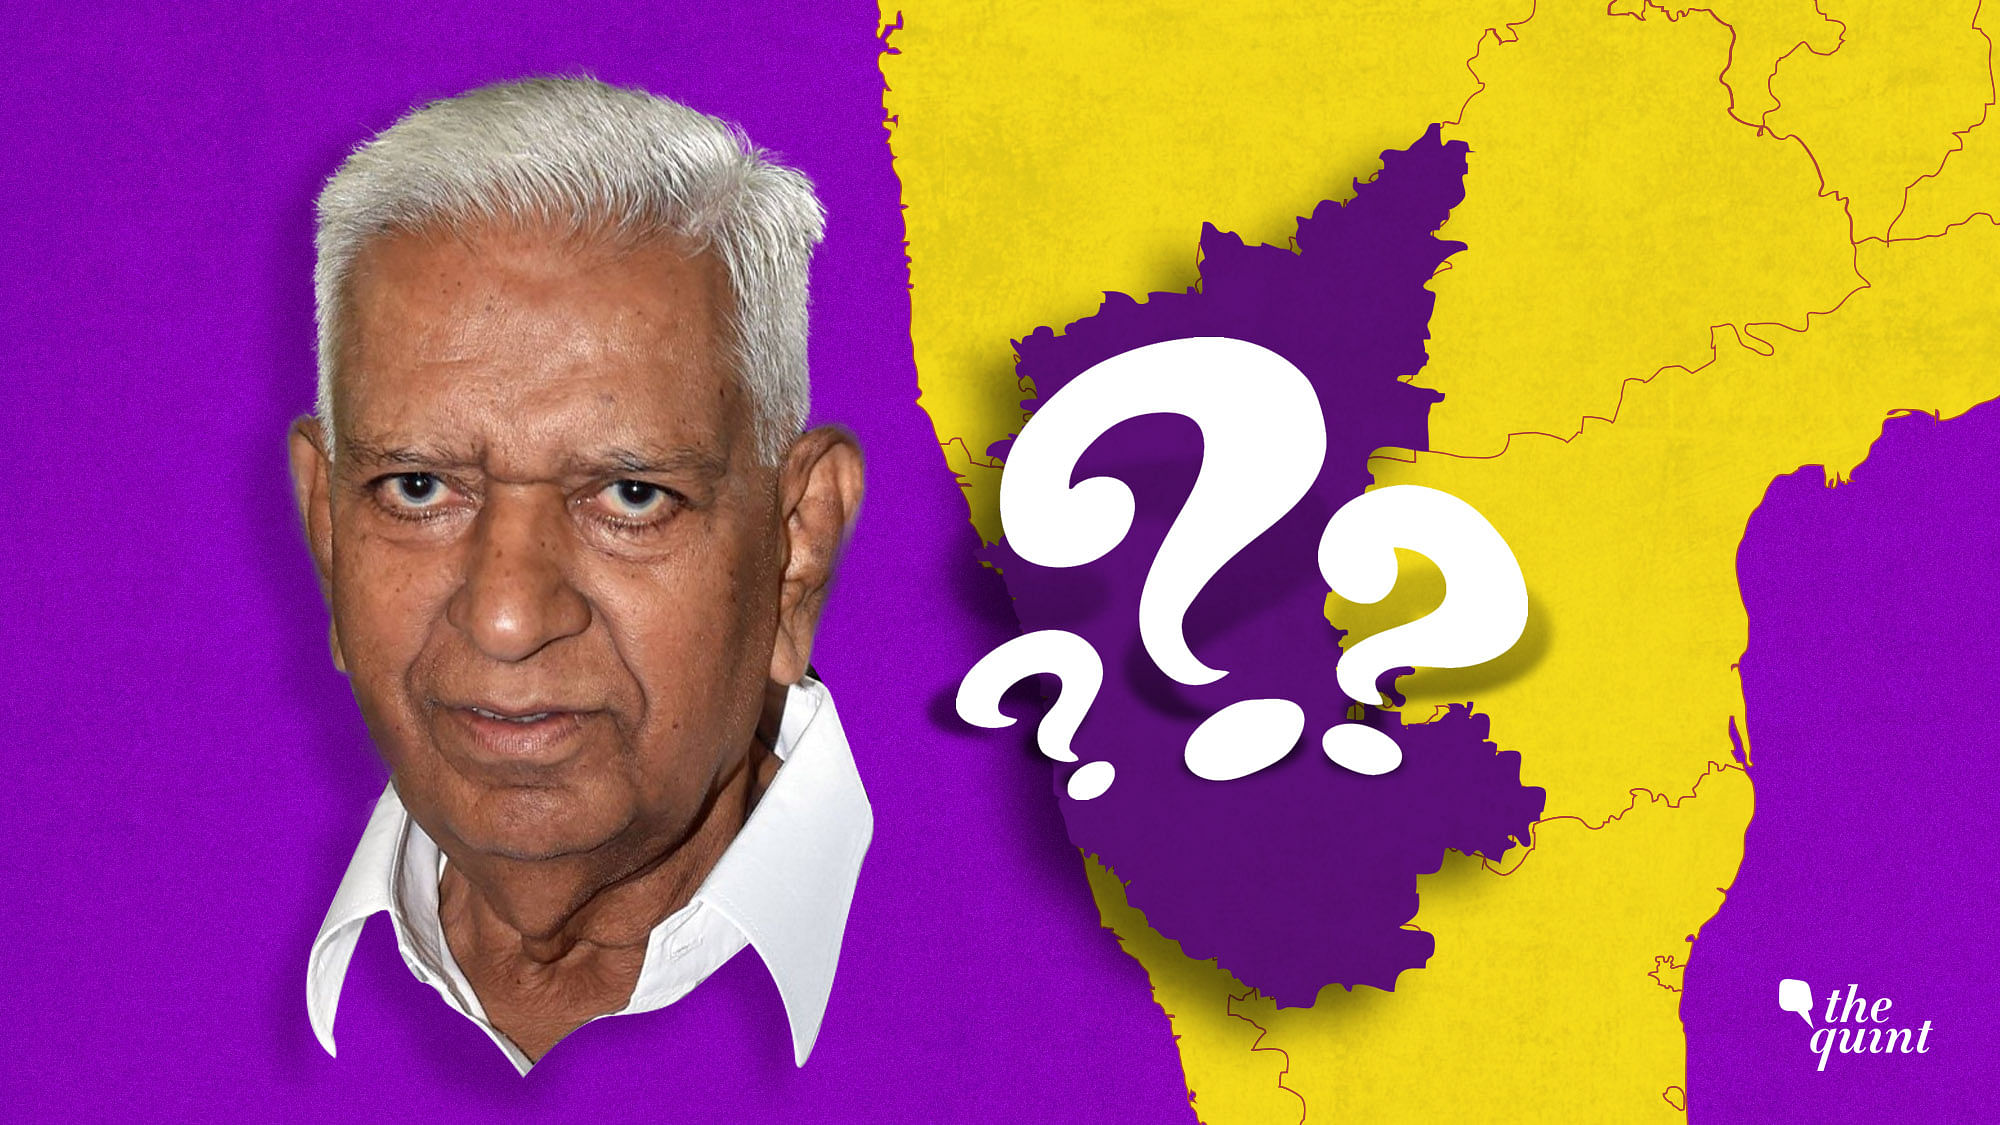 If the Congress-JD(S) alliance keeps the BJP from making it to the majority mark, what are the options for the Karnataka governor?